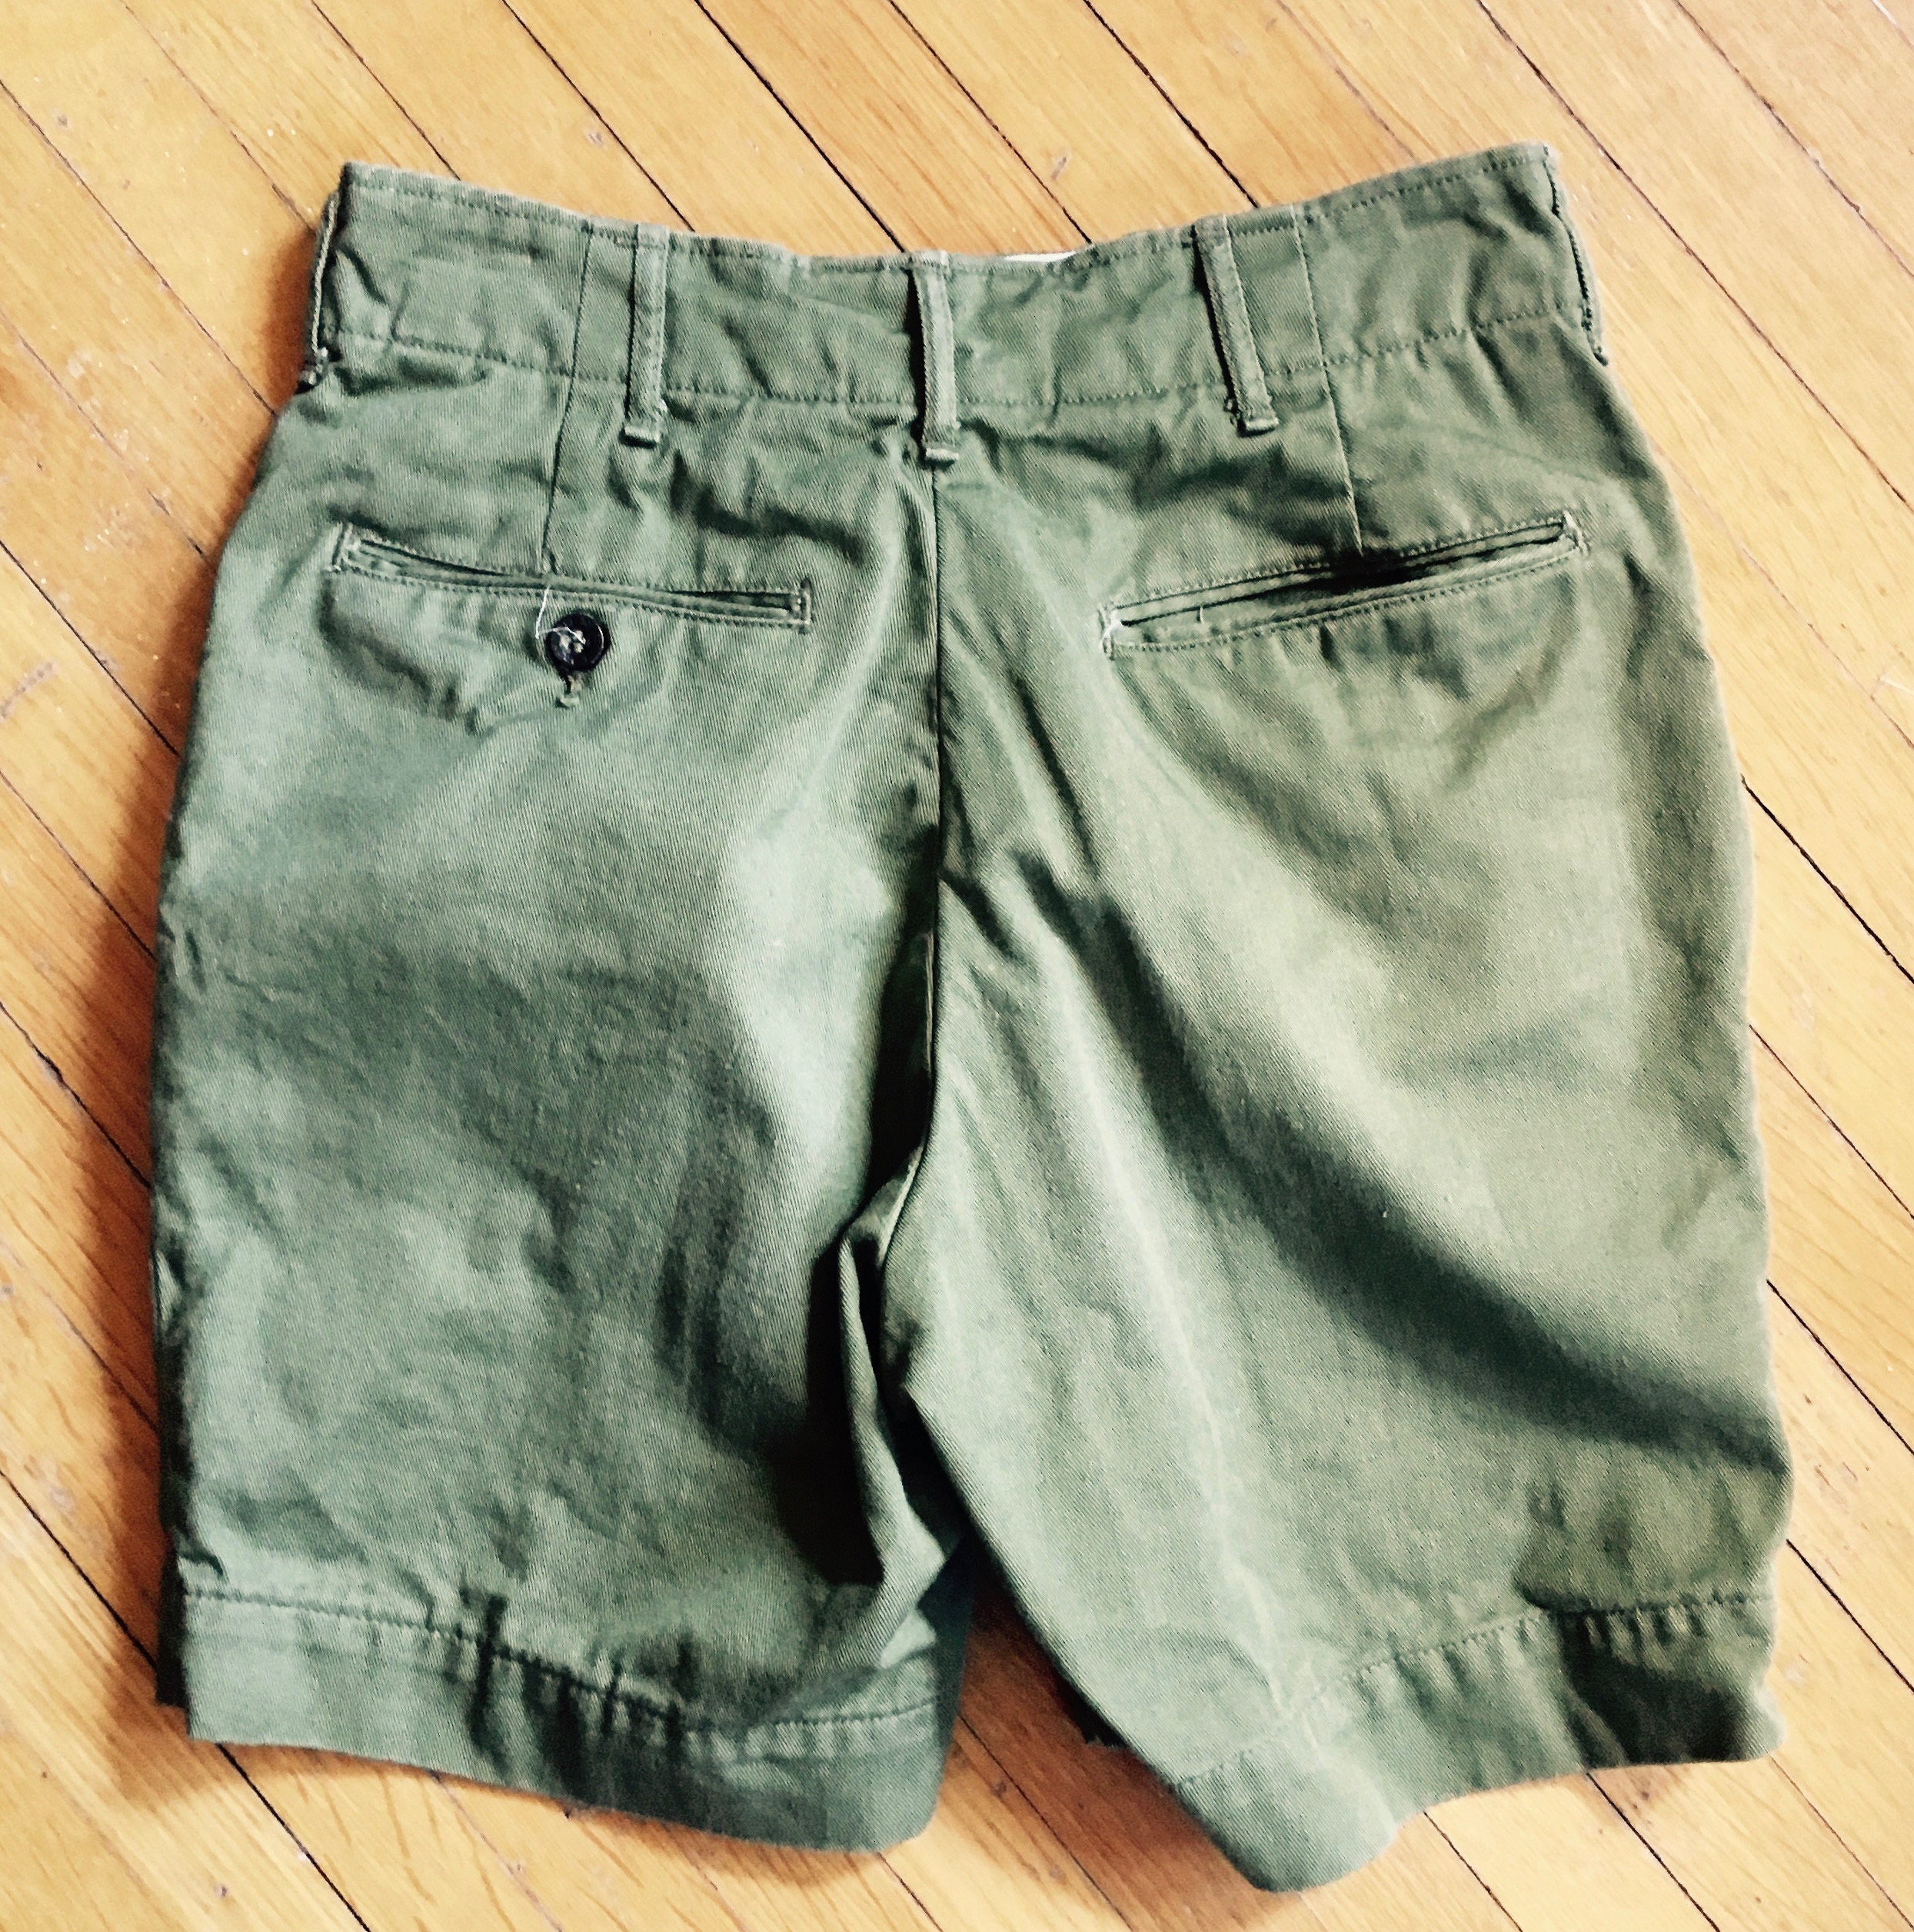 Vintage 1950s BOY SCOUTS of AMERICA olive green shorts size | Etsy